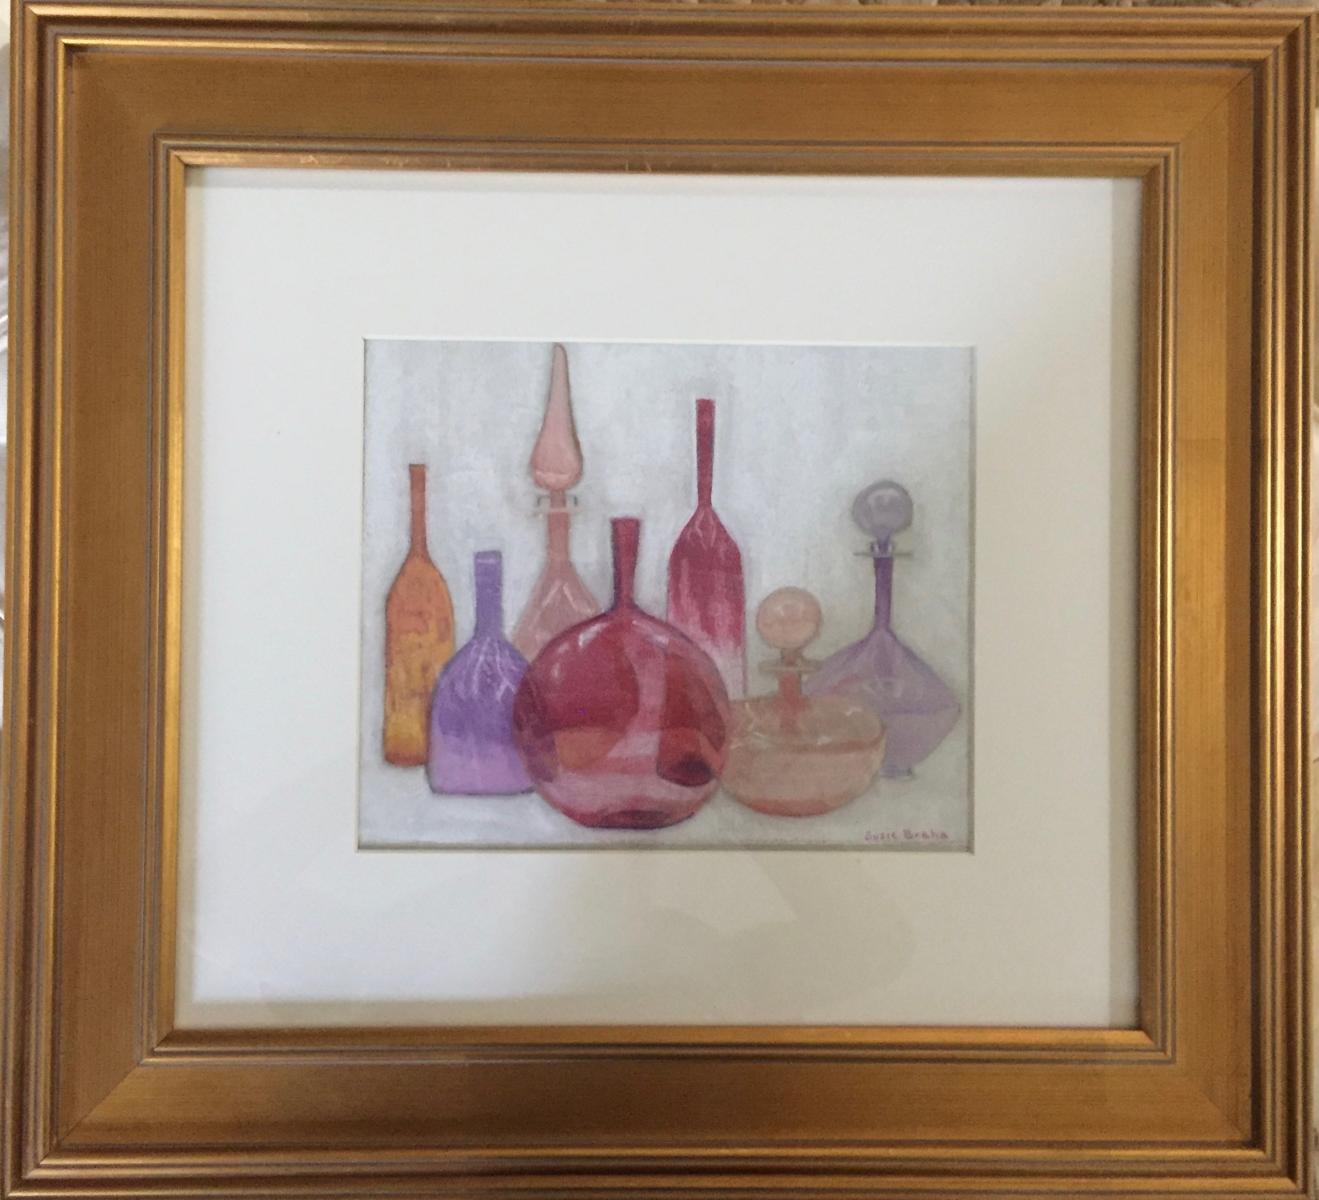 "Decanters "
Pastel  Original Photo from a Magazine
In New Jersey Home : Still Life : Susan Braha Photography and Fine Art